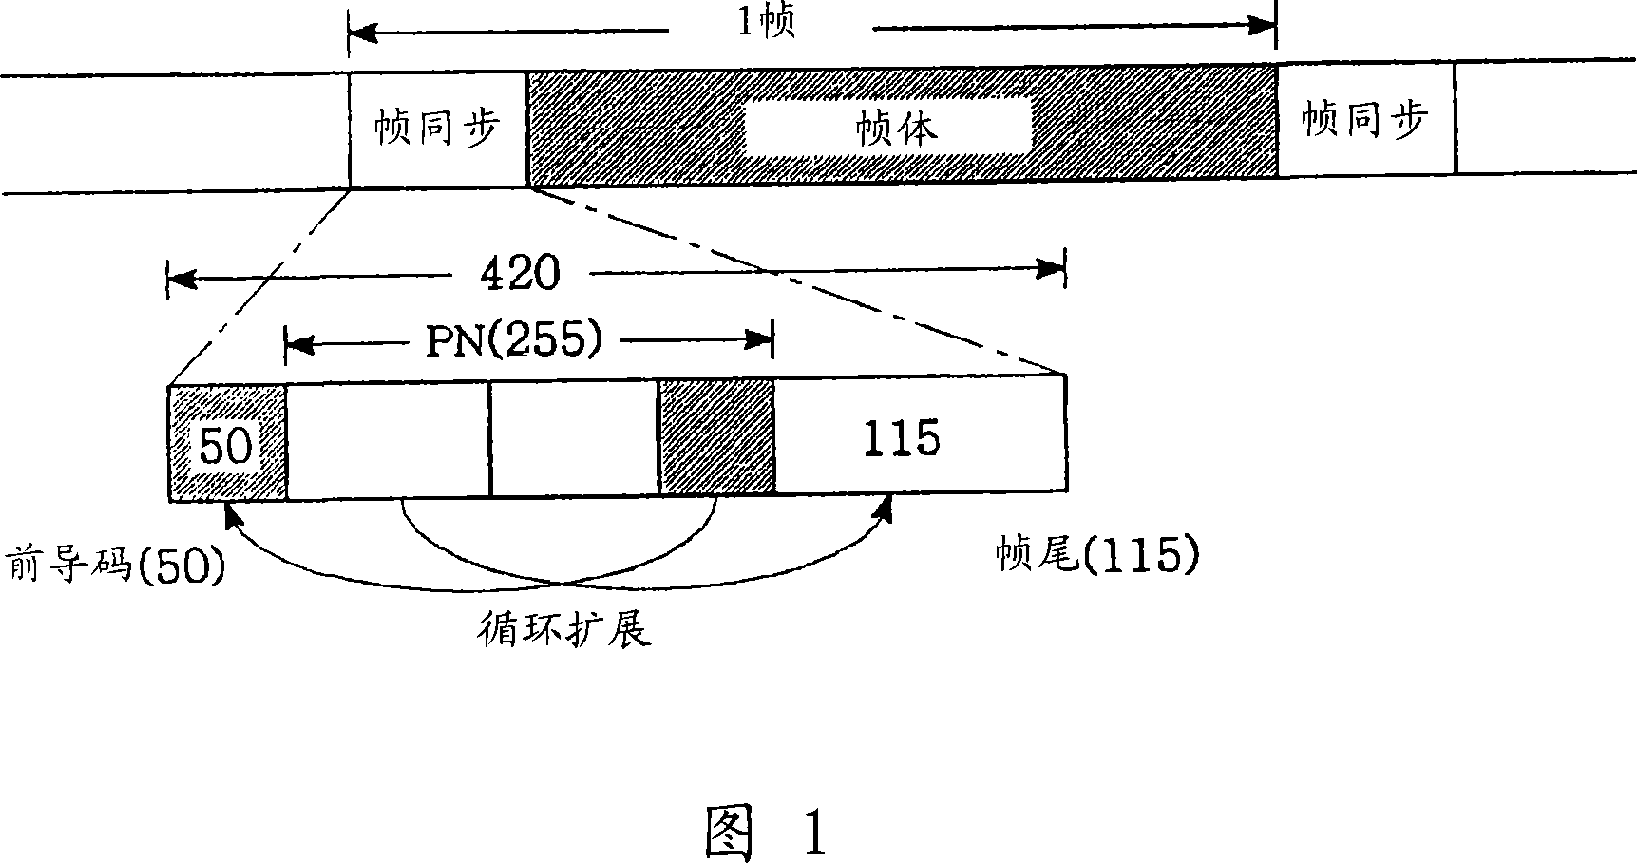 Method and apparatus for digital automatic gain control